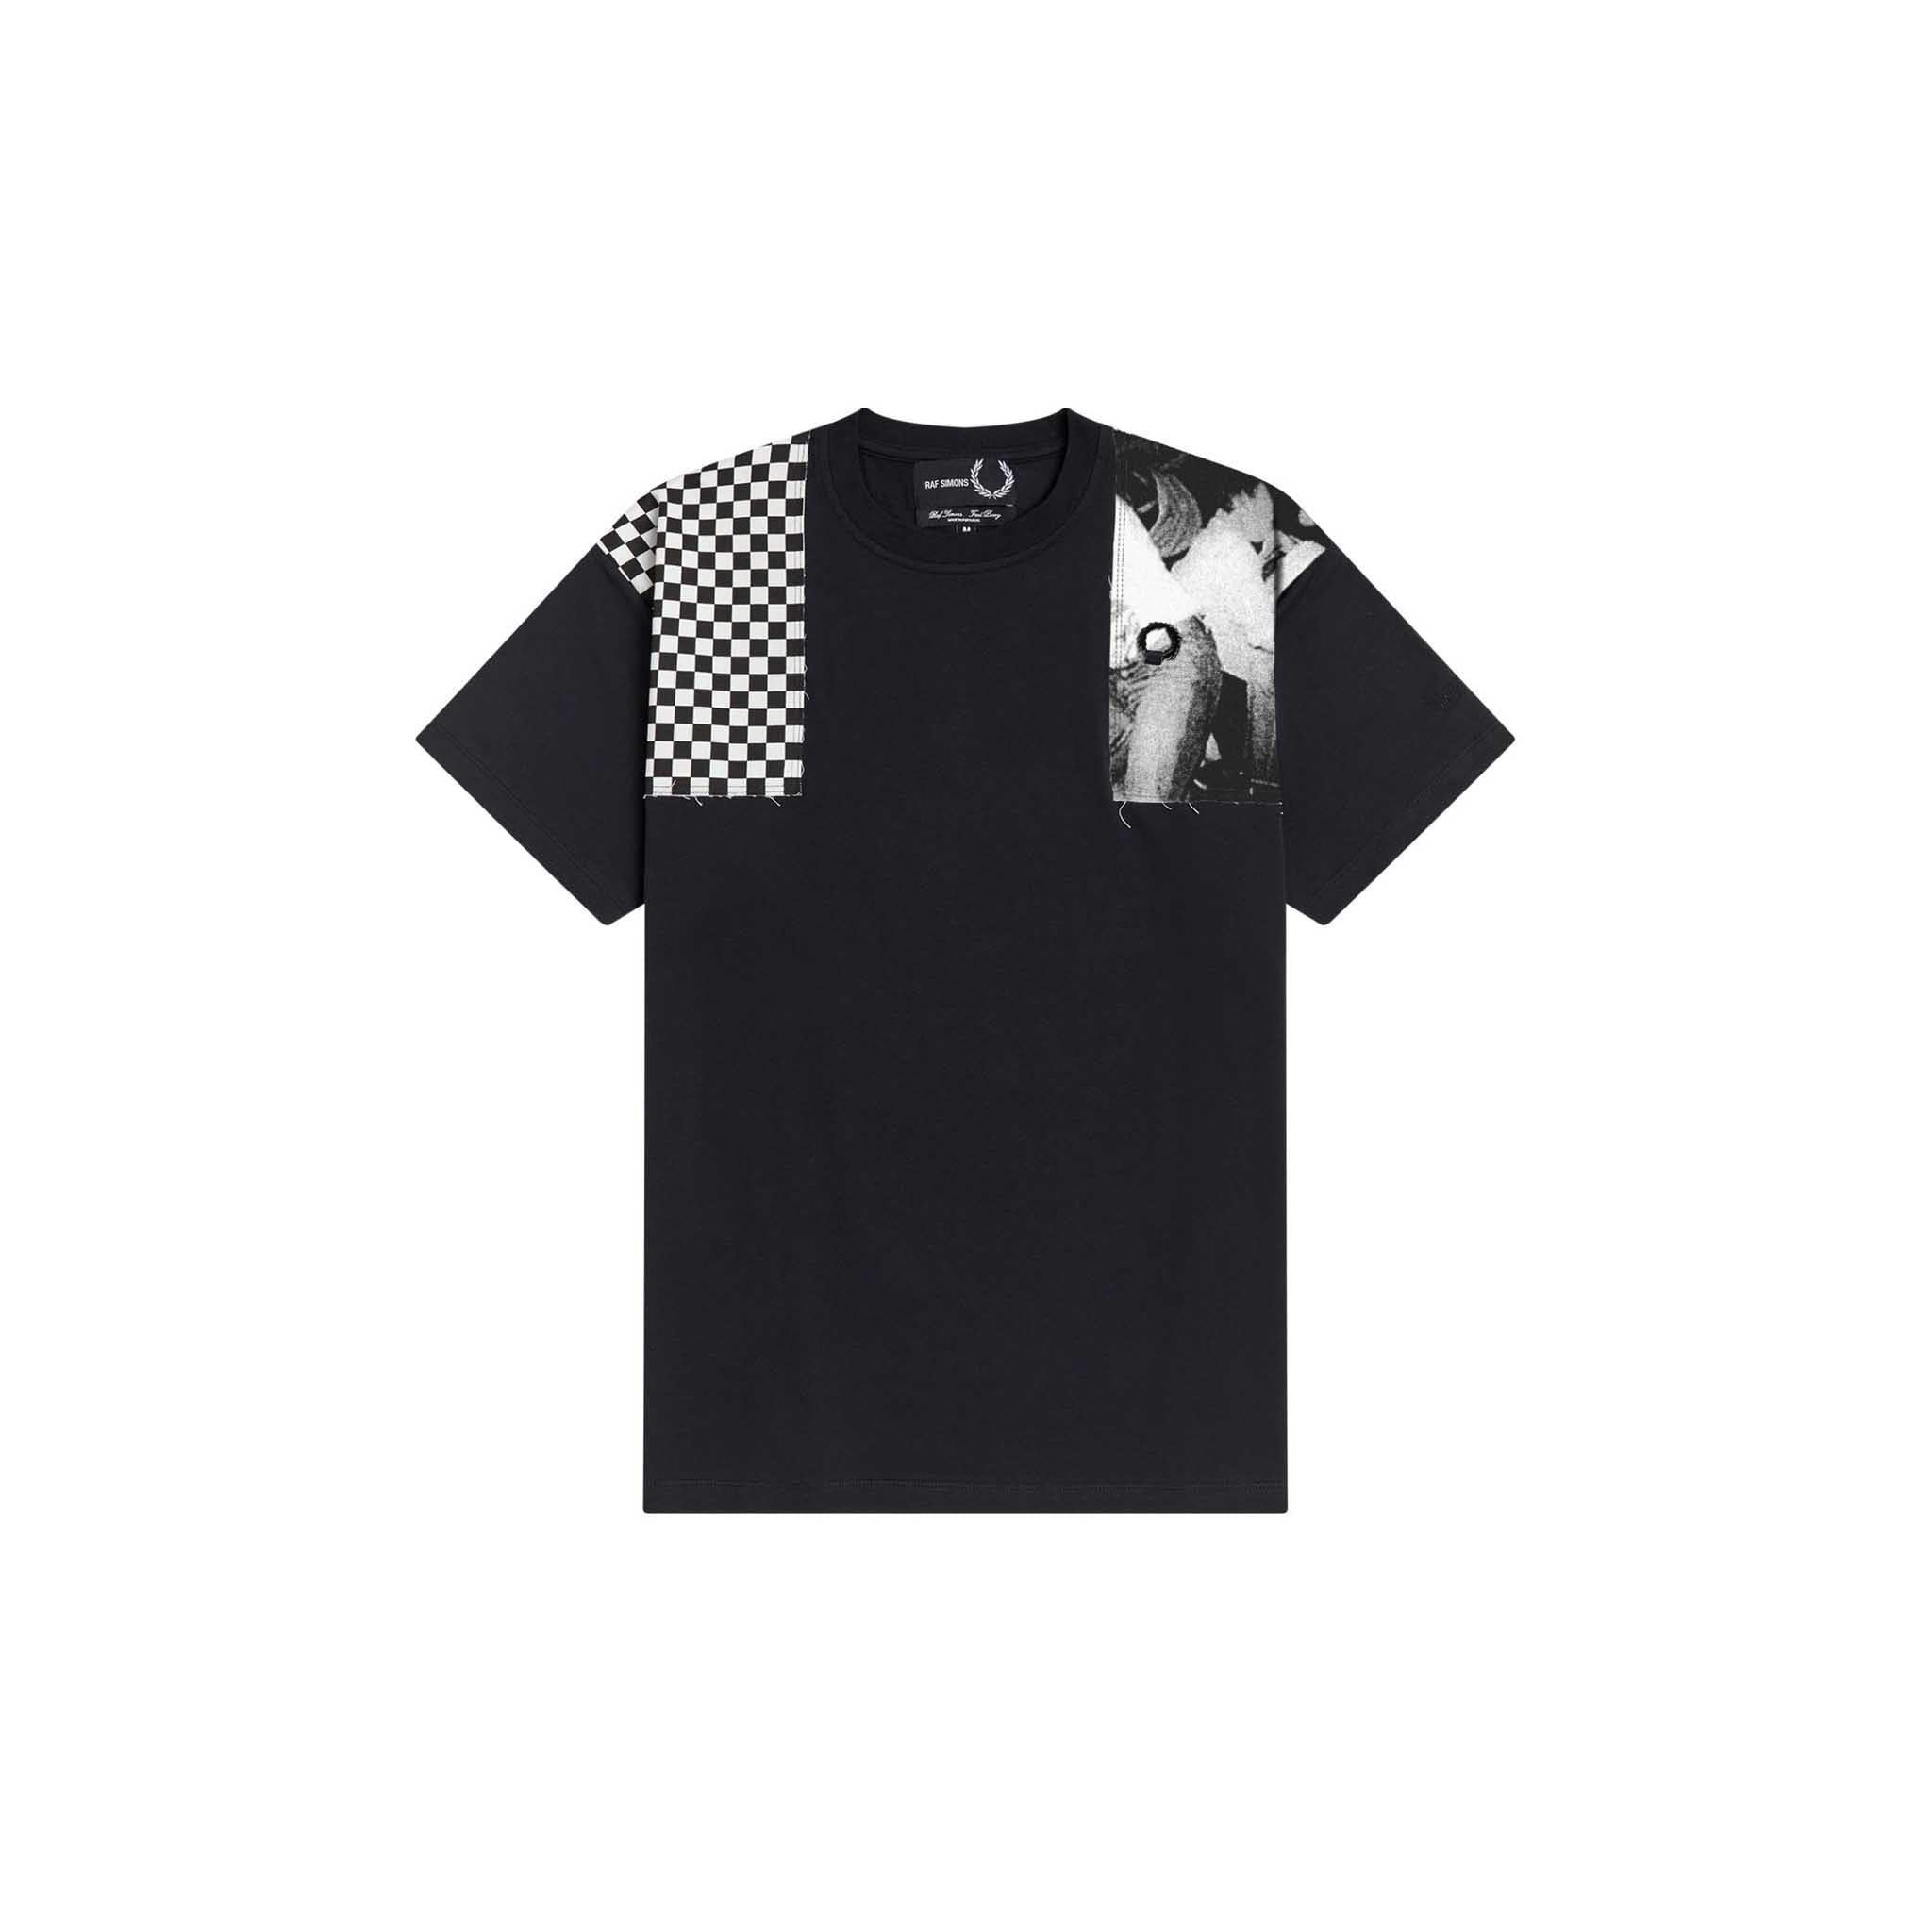 Fred Perry x Raf Simons Oversized Printed Patch T-Shirt Black